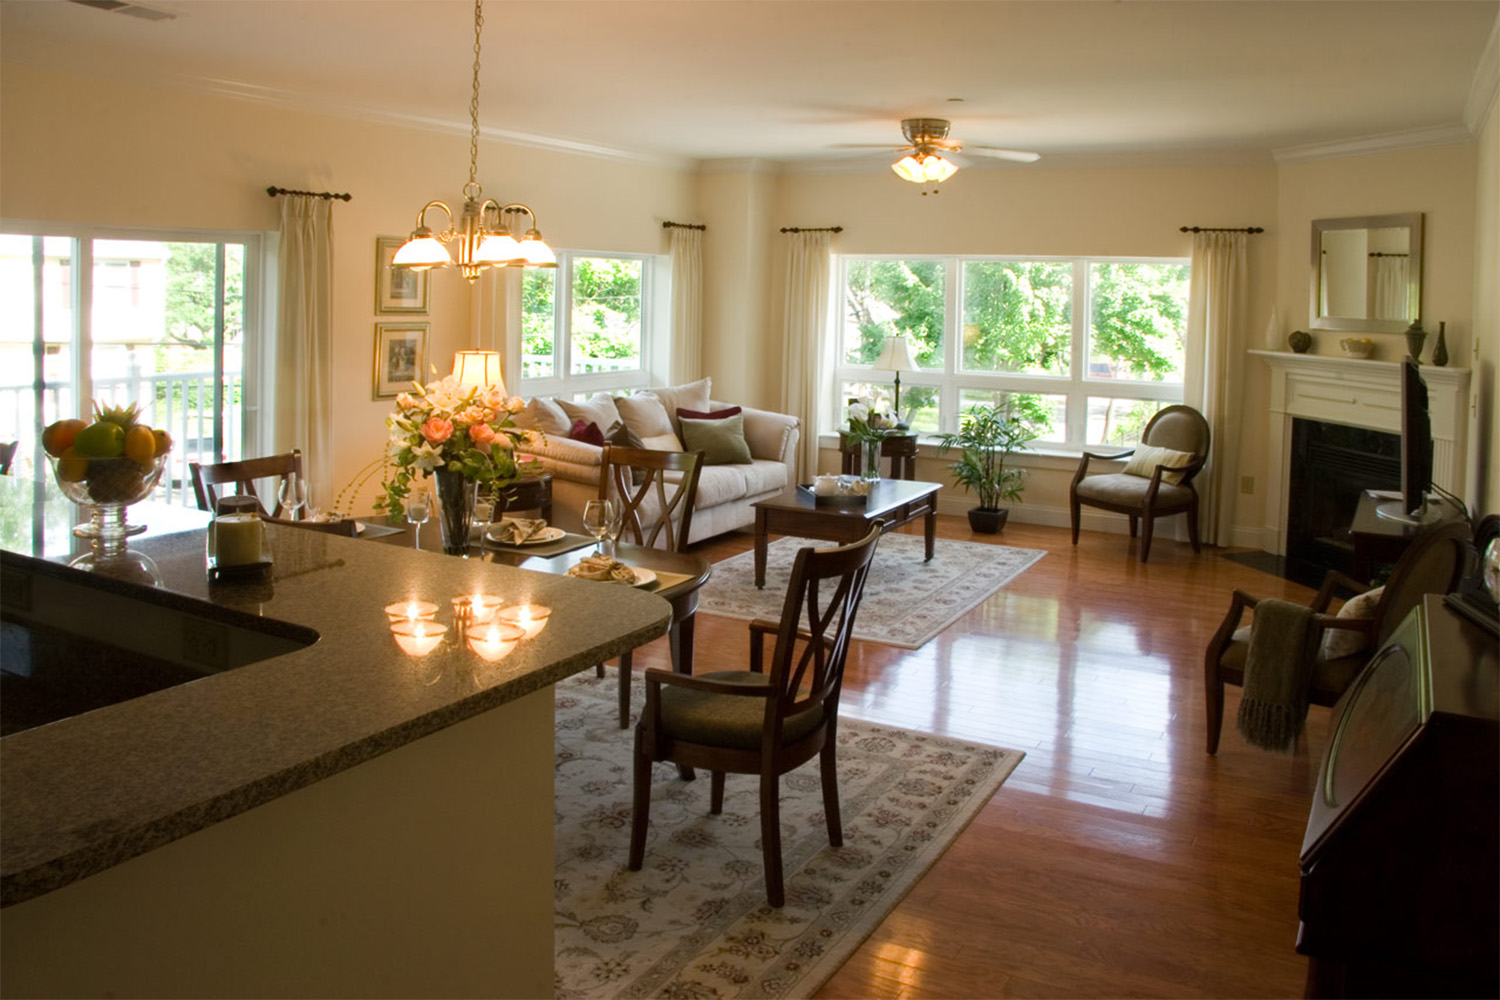 Dining room and living room with chandelier light fixture and fireplace